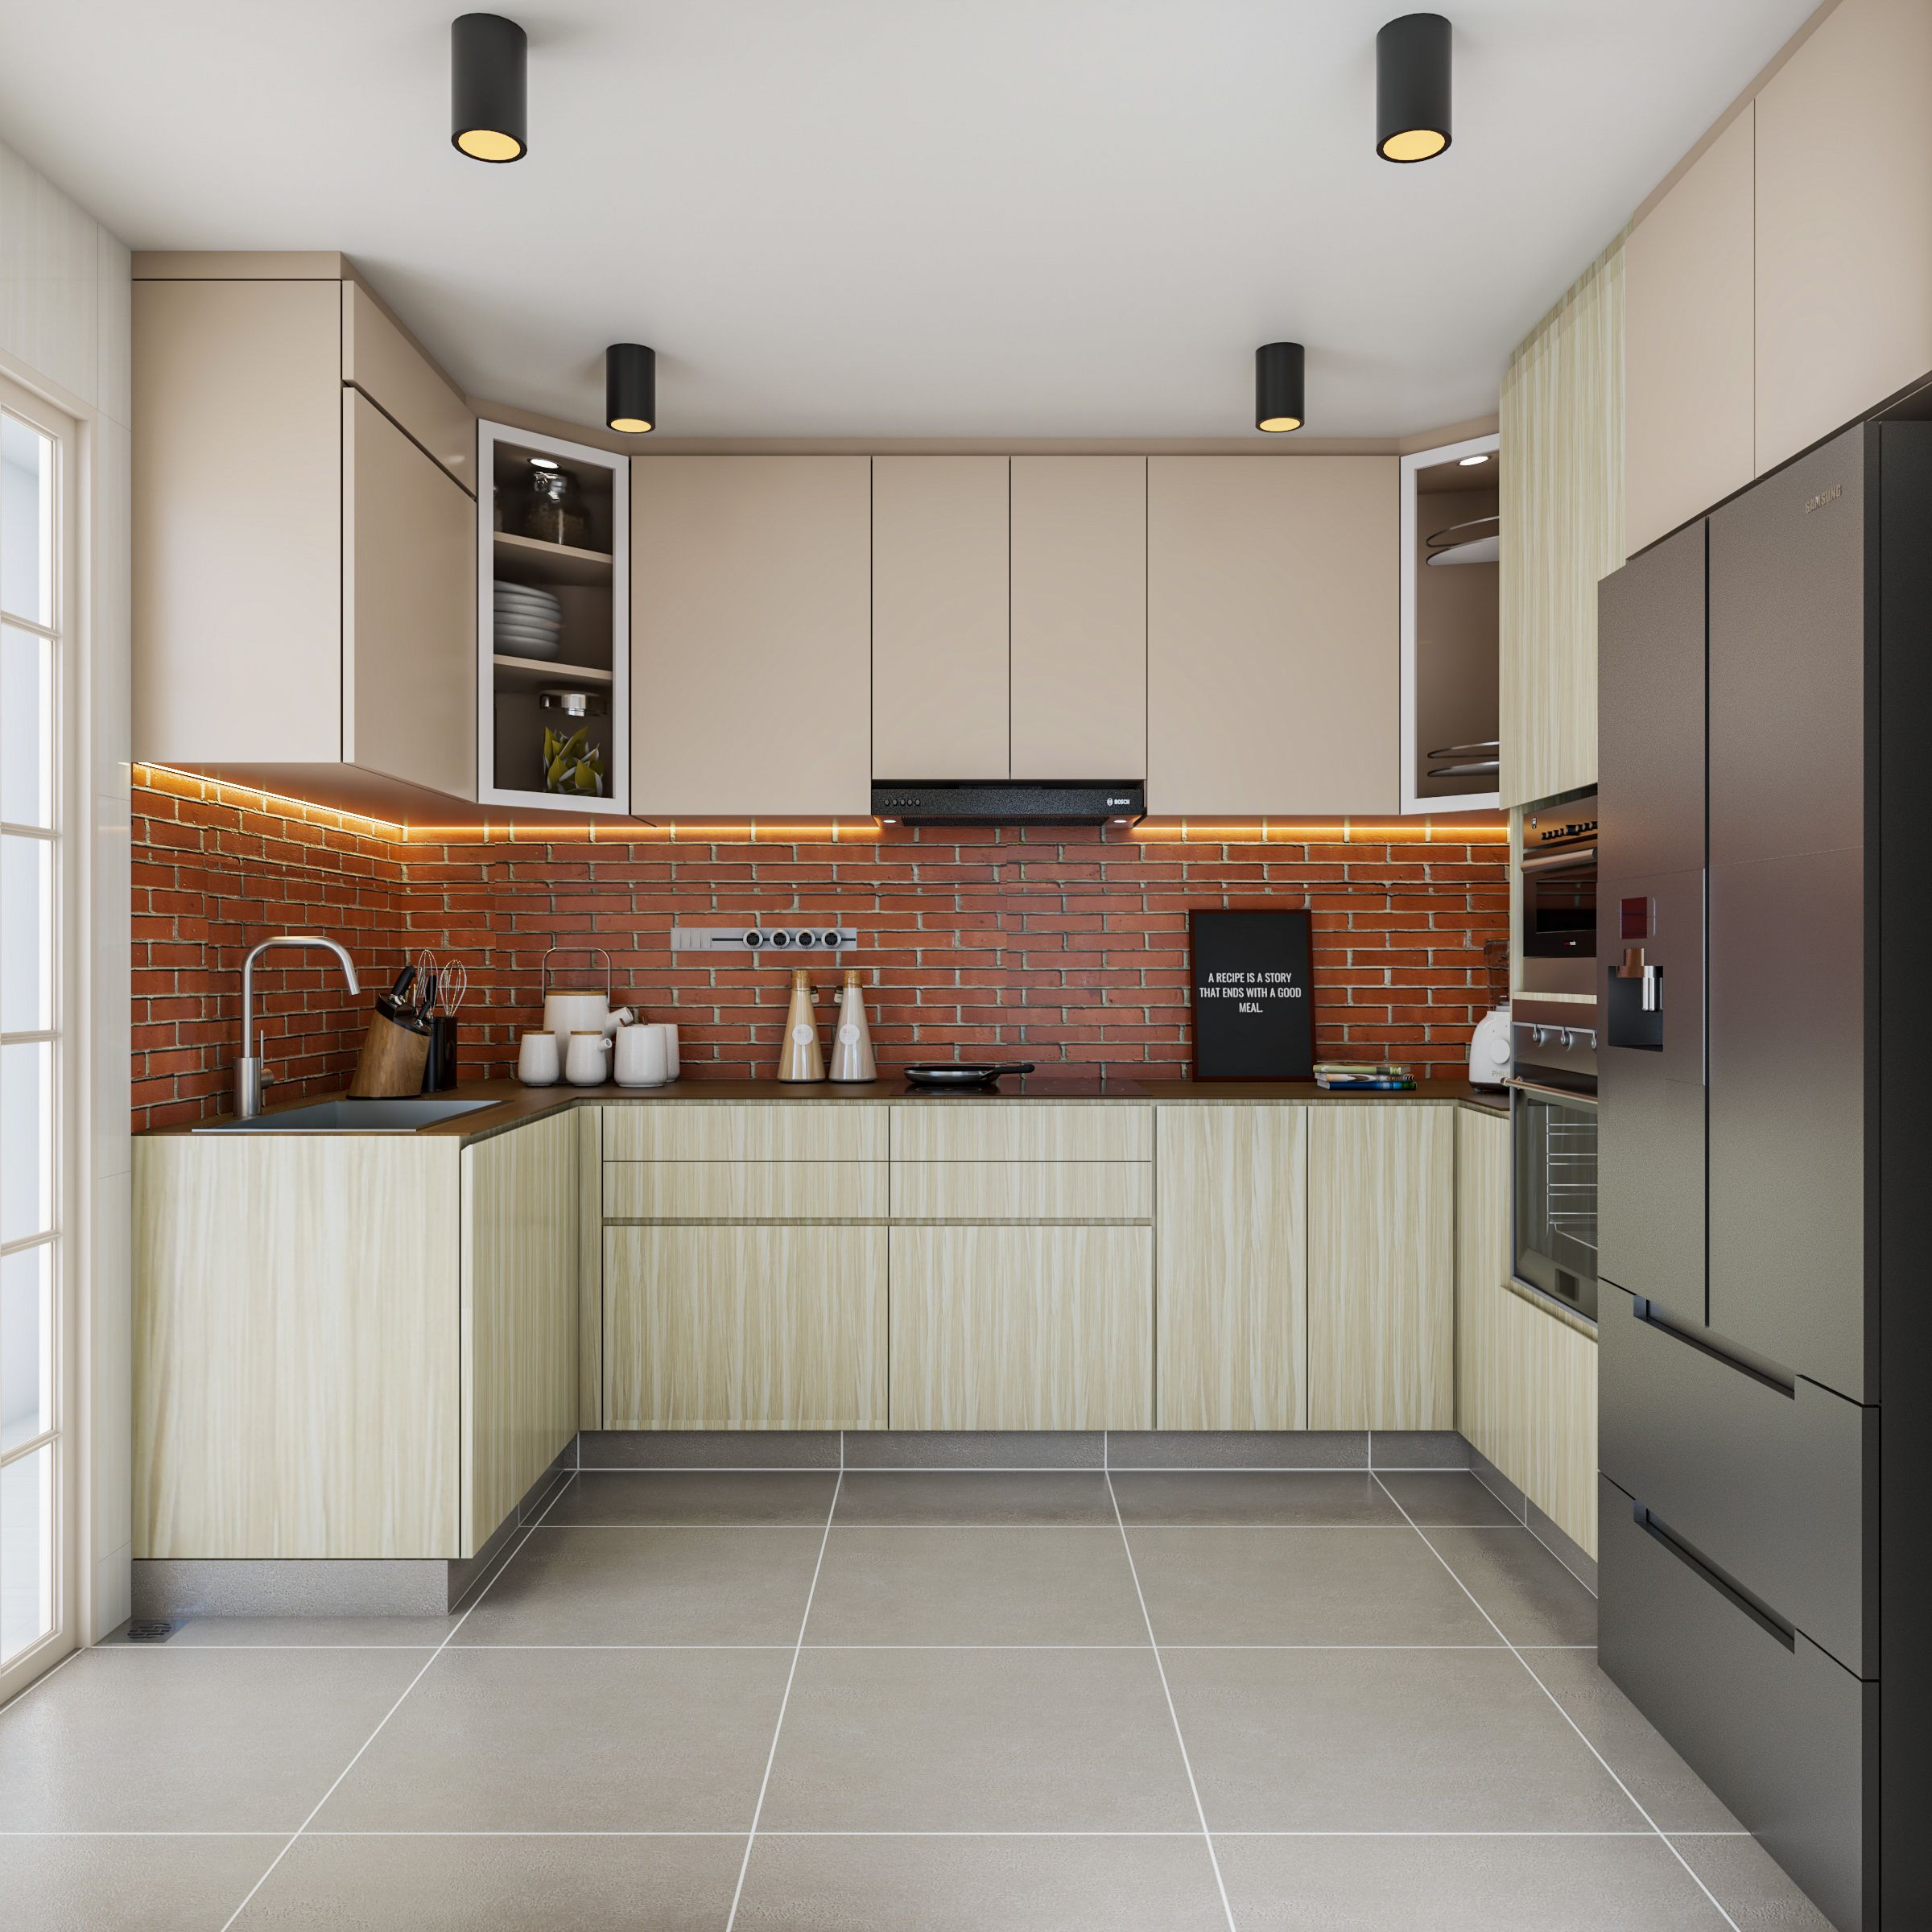 Contemporary Modular Kitchen Design With Beige Cabinetry And Brick Dado Tiles